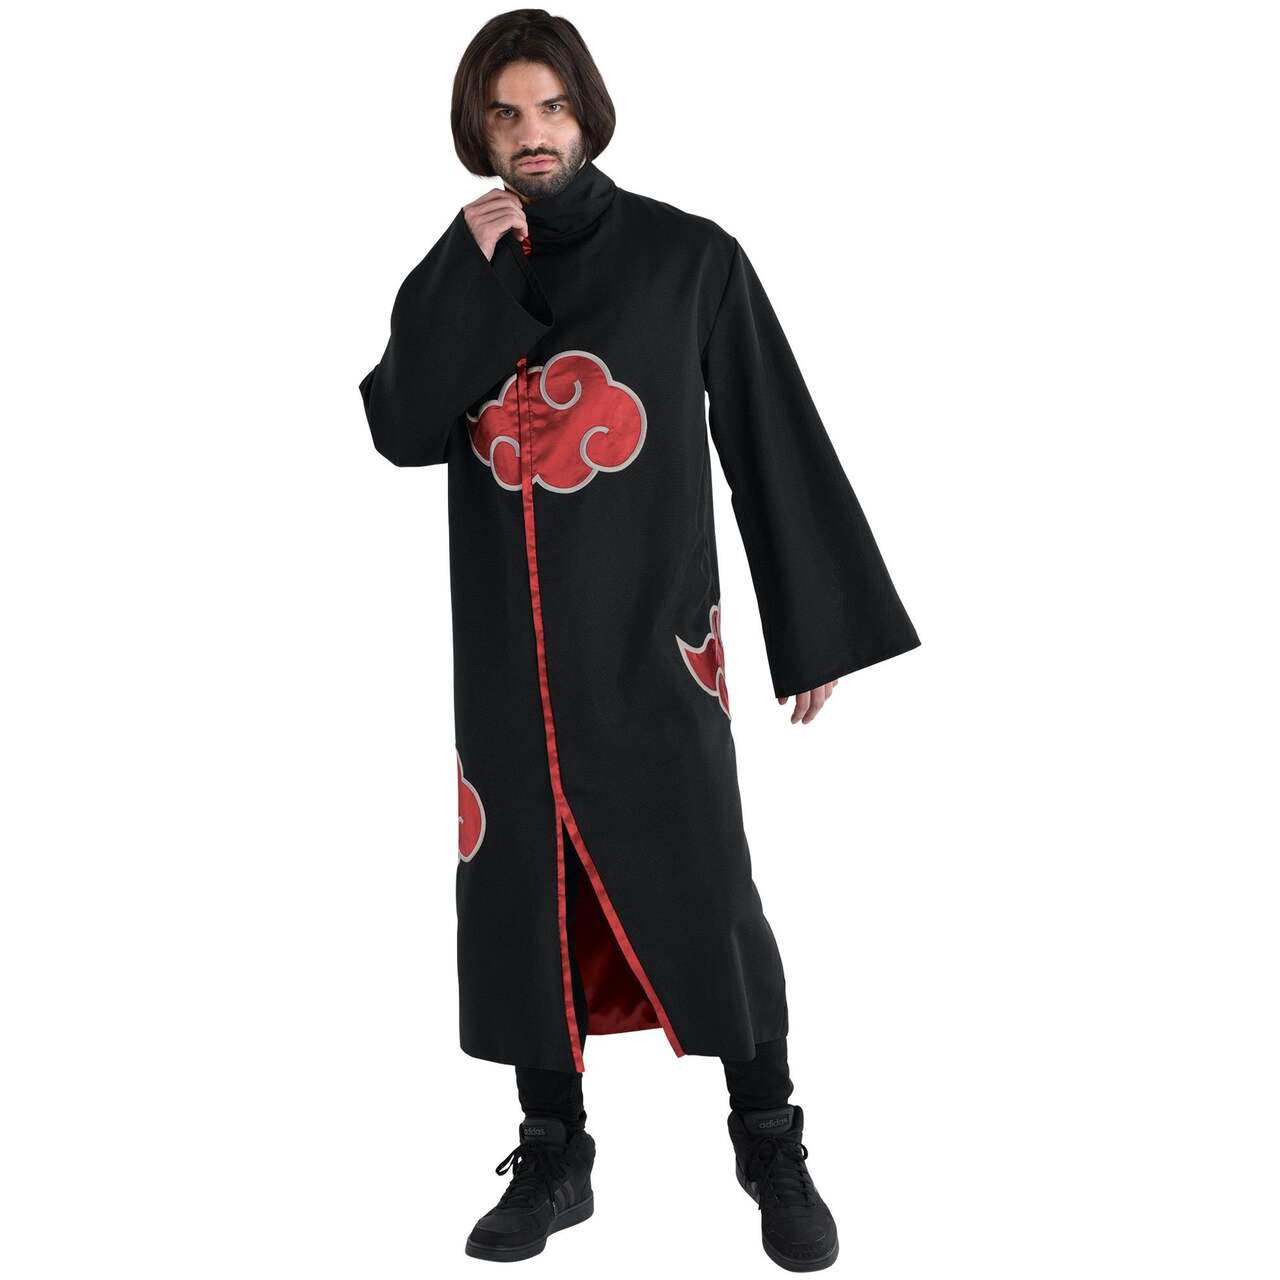 https://media-www.canadiantire.ca/product/automotive/party-city-seasonal/party-city-halloween-harvest/8552315/naruto-robe-adult-standard-0396ce82-9d49-49a4-a507-16cefbaddf5e-jpgrendition.jpg?imdensity=1&imwidth=640&impolicy=mZoom